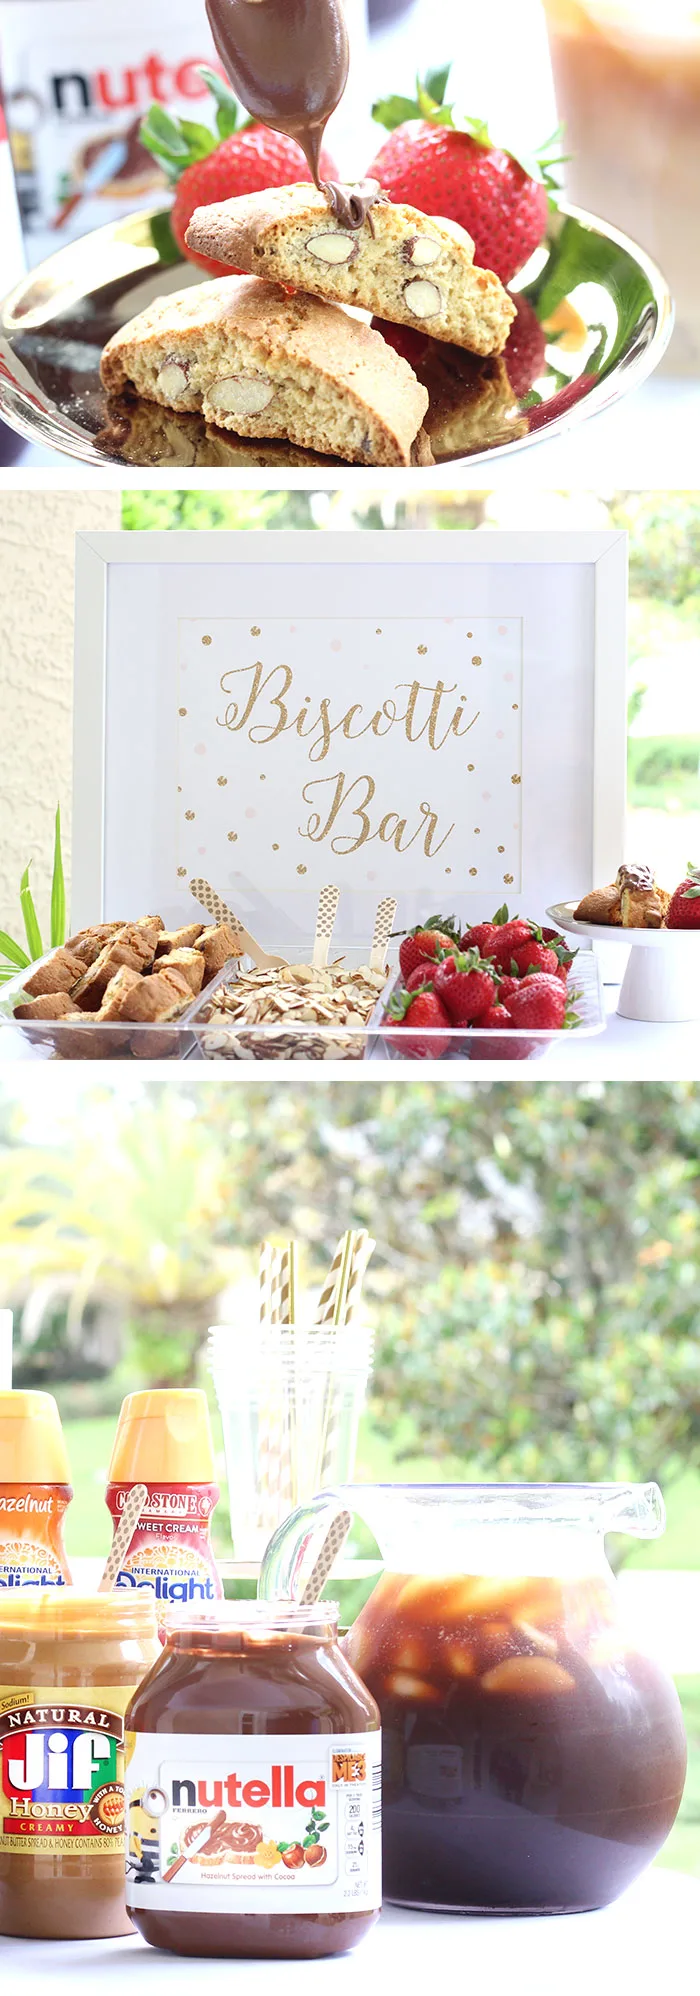 Biscotti Bar. Bored with the same old, too? Check out these savvy biscotti bar ideas with iced coffee fixings too.